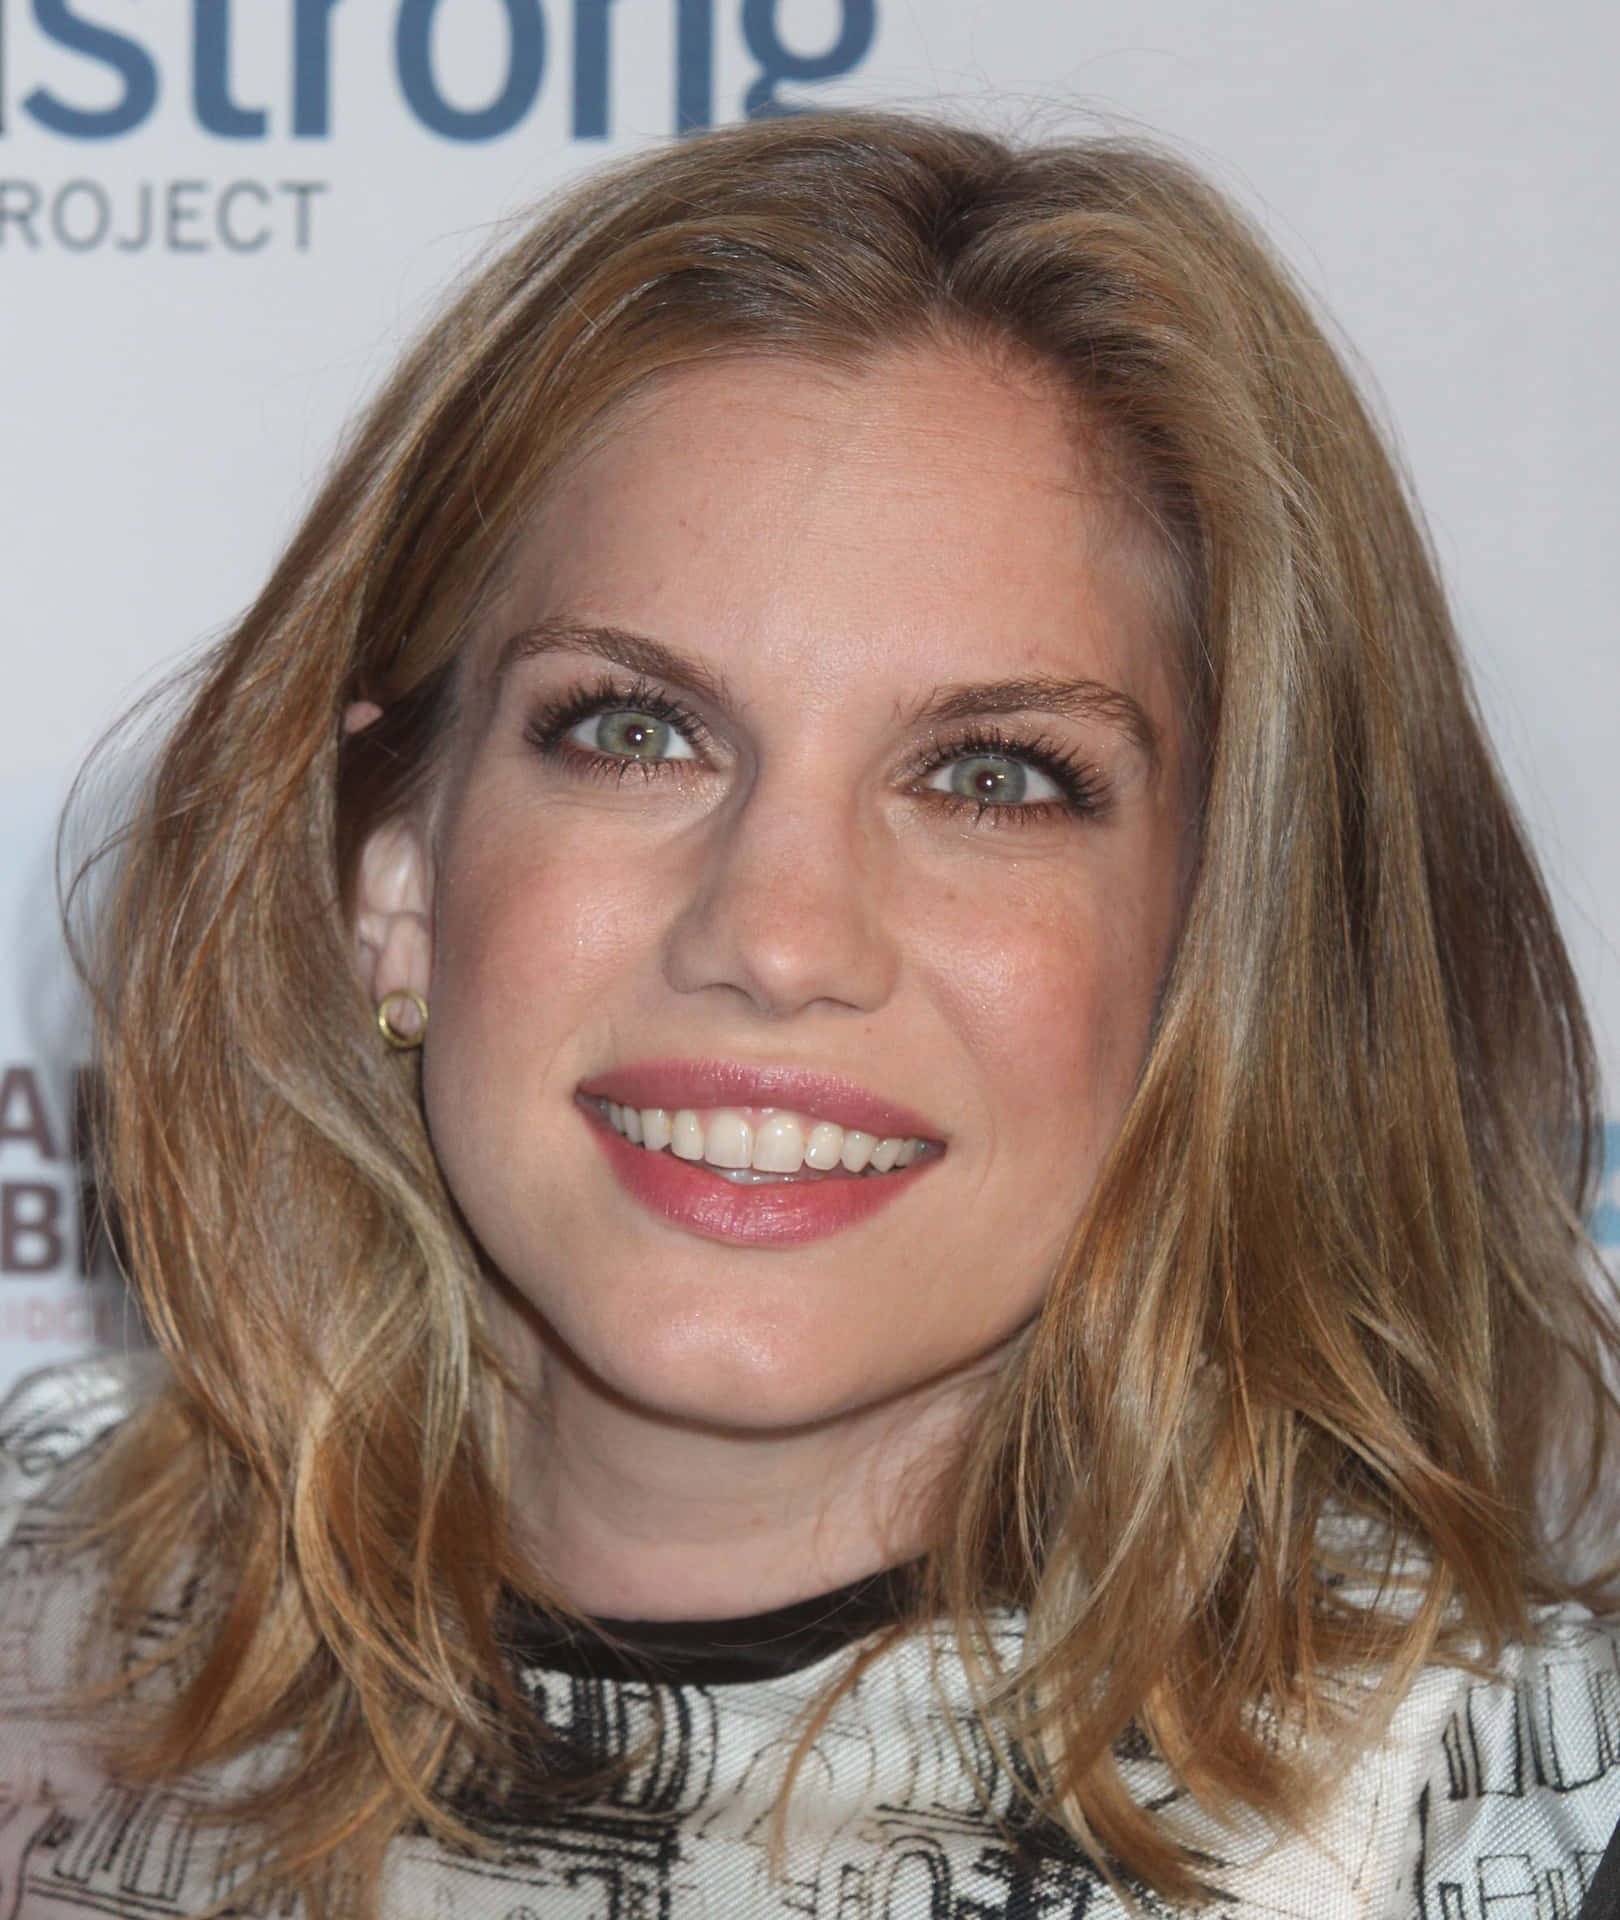 Anna Chlumsky striking a pose in a photoshoot. Wallpaper